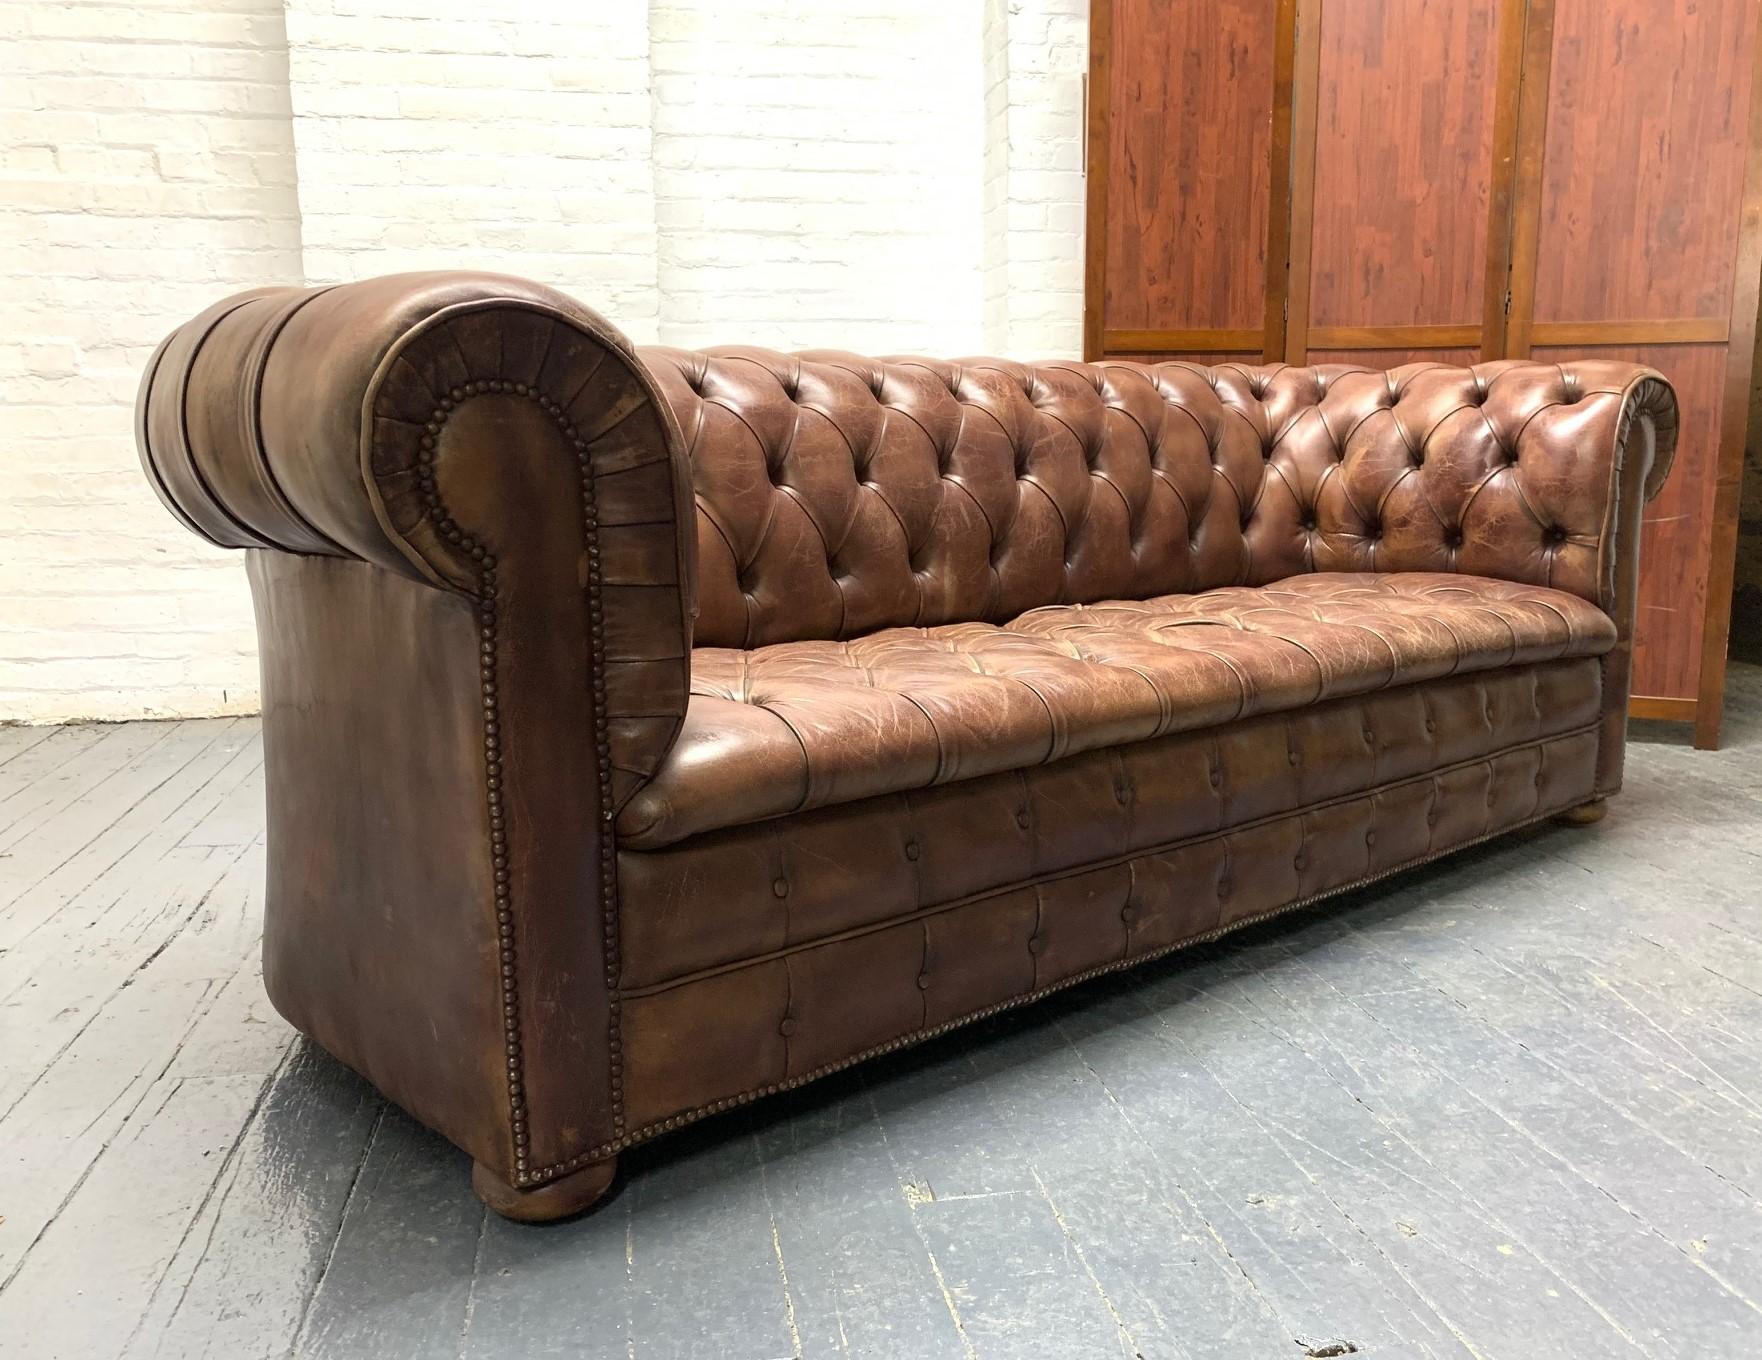 Chesterfield sofa in brown tufted leather, round wood bun feet, and brass nailhead trim.